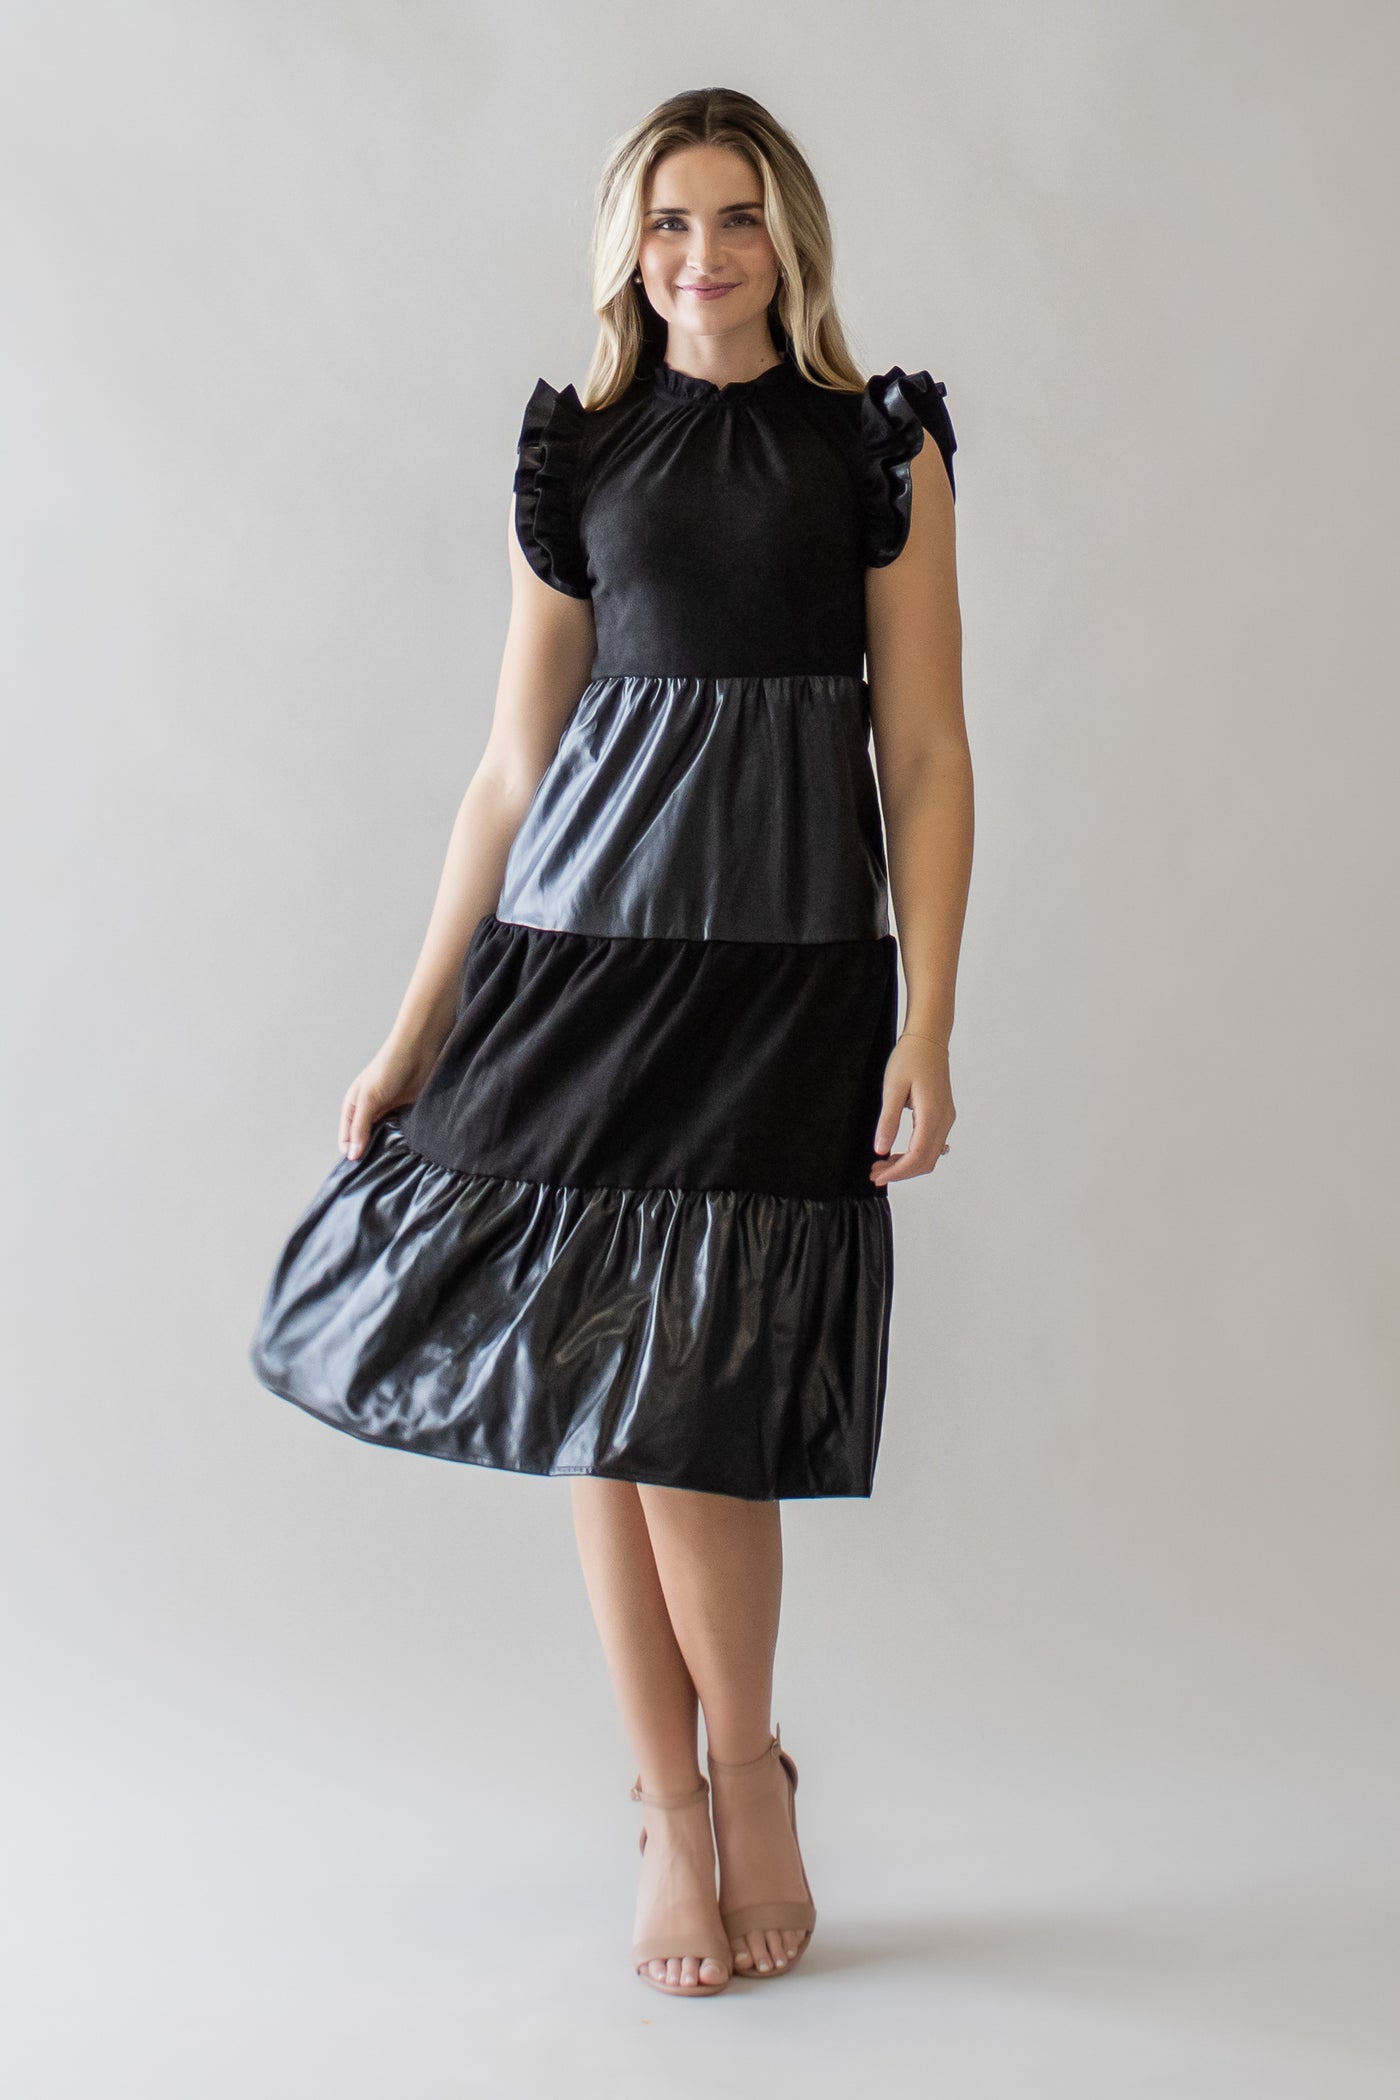 This is a black modest dress with a tiered skirt and different layers of pleather and fabric.